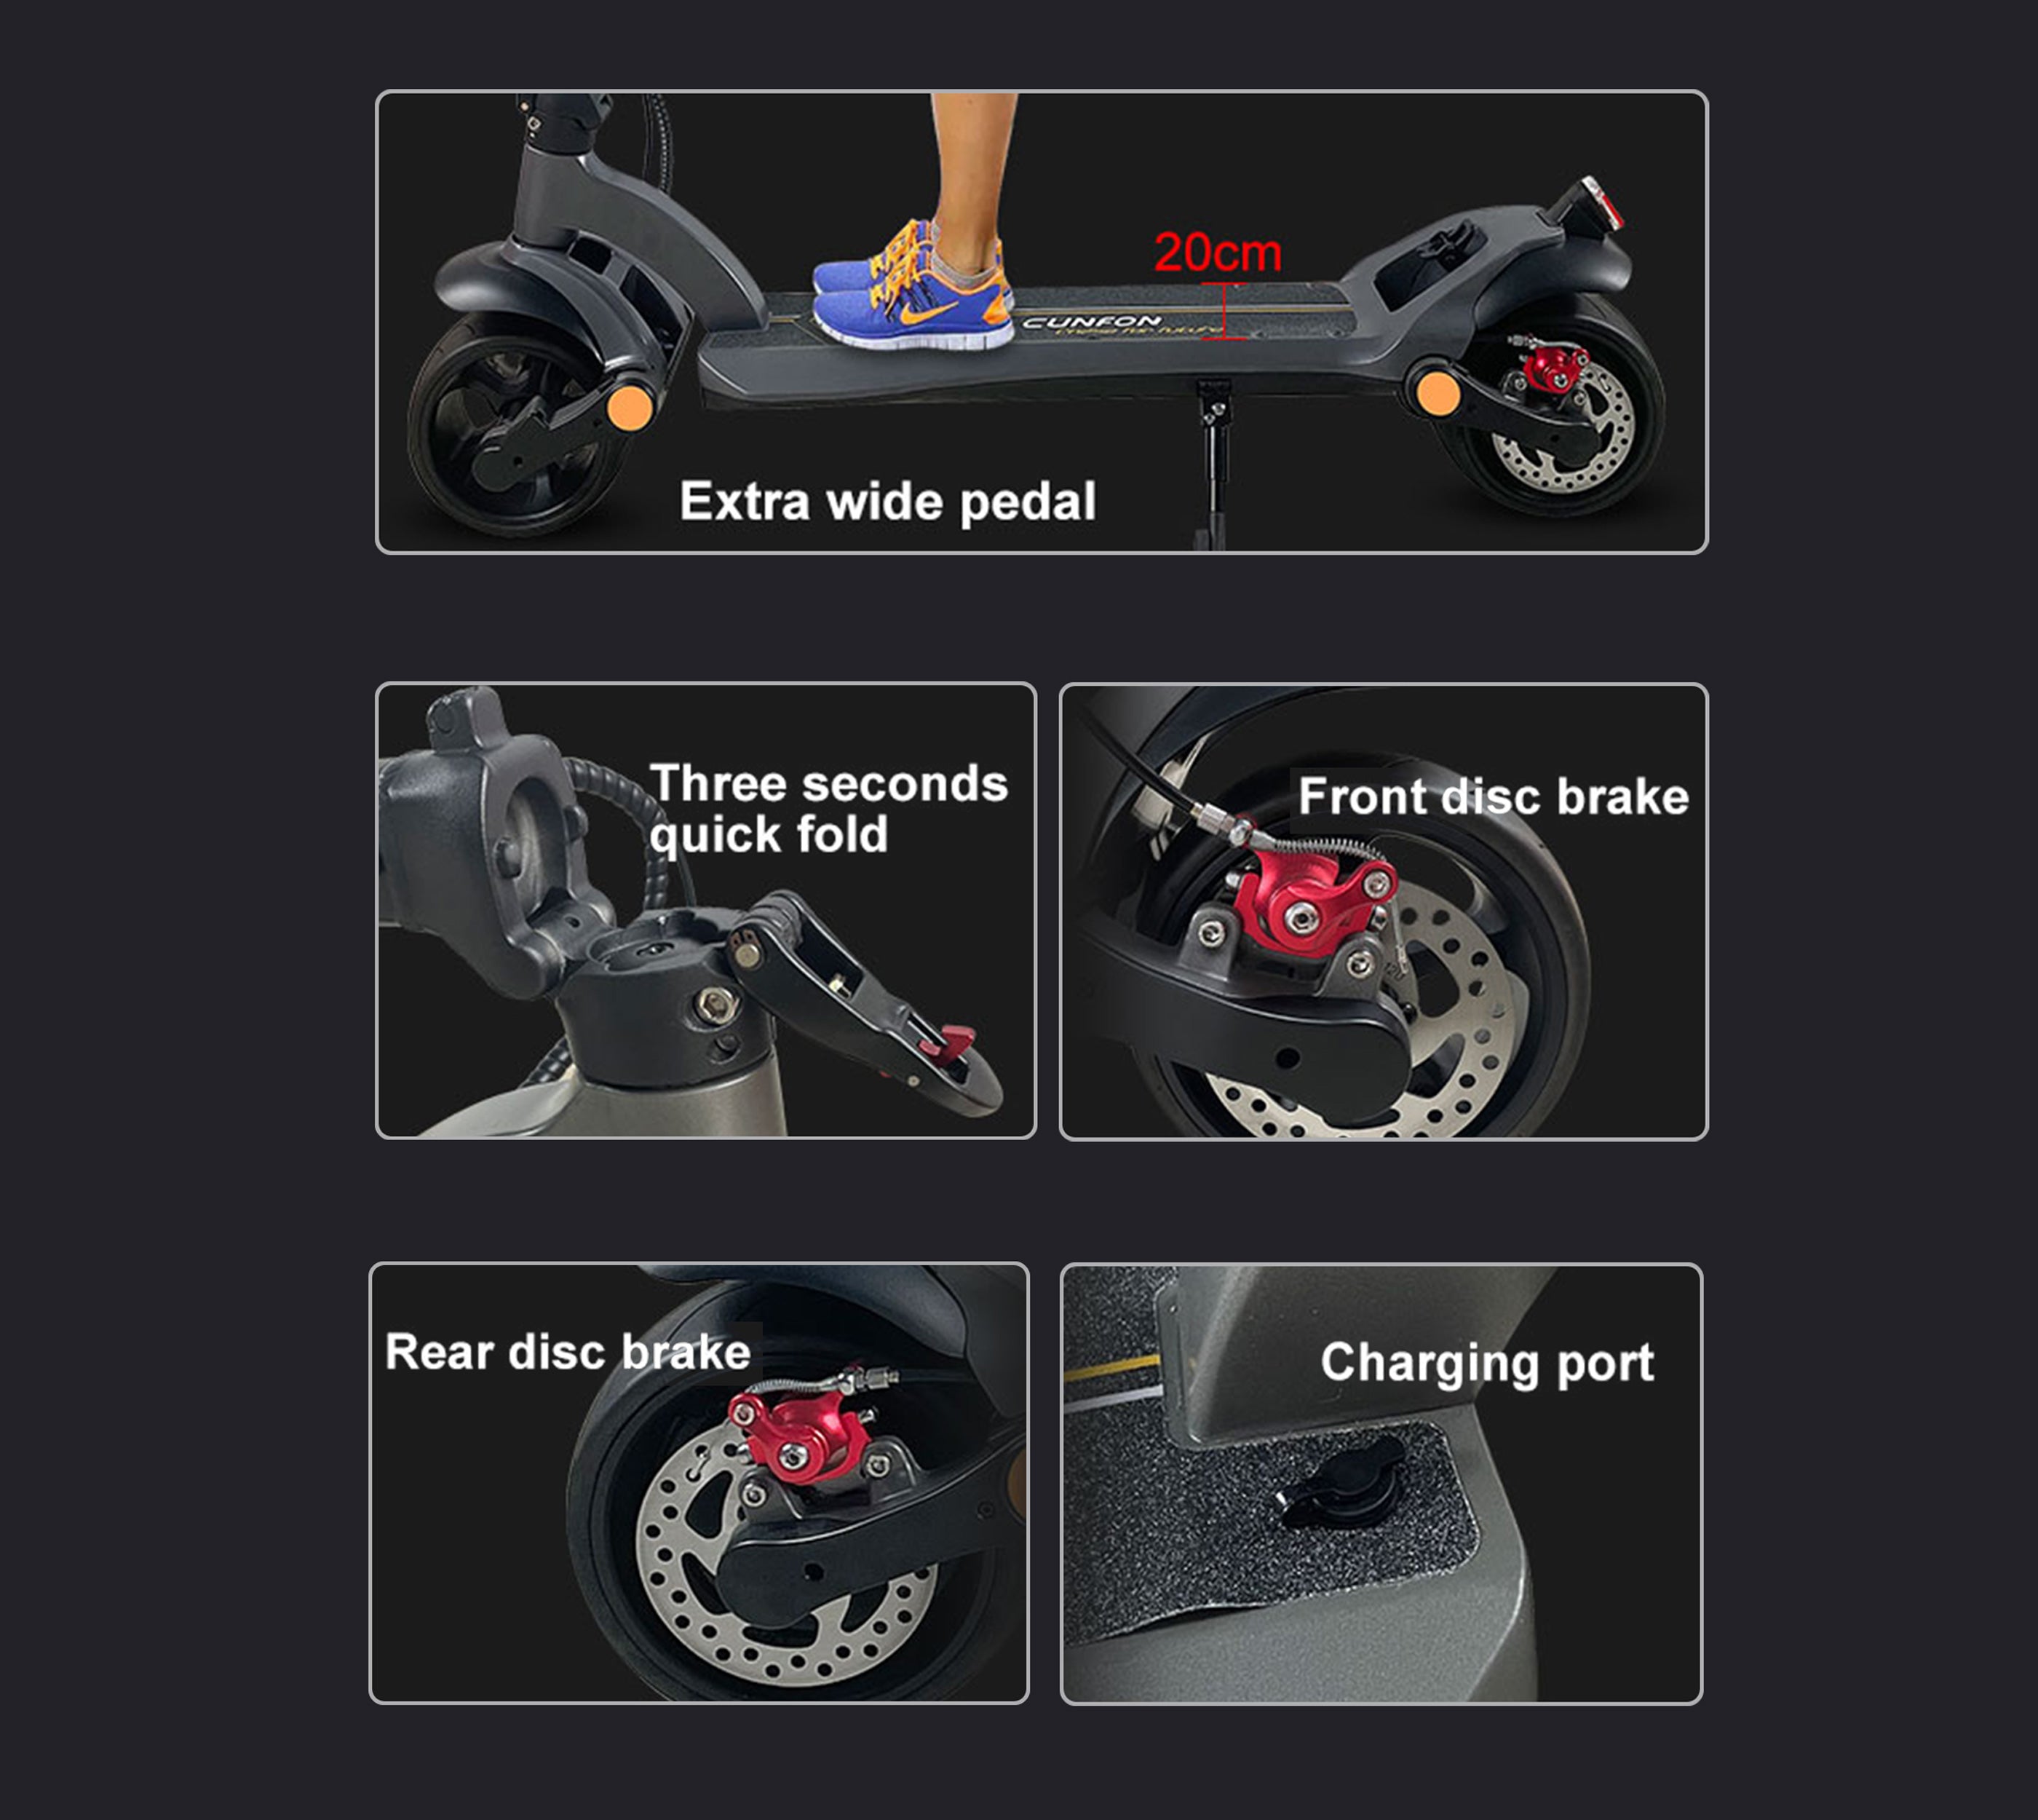 LZ500 Electric Scooter – cunfon